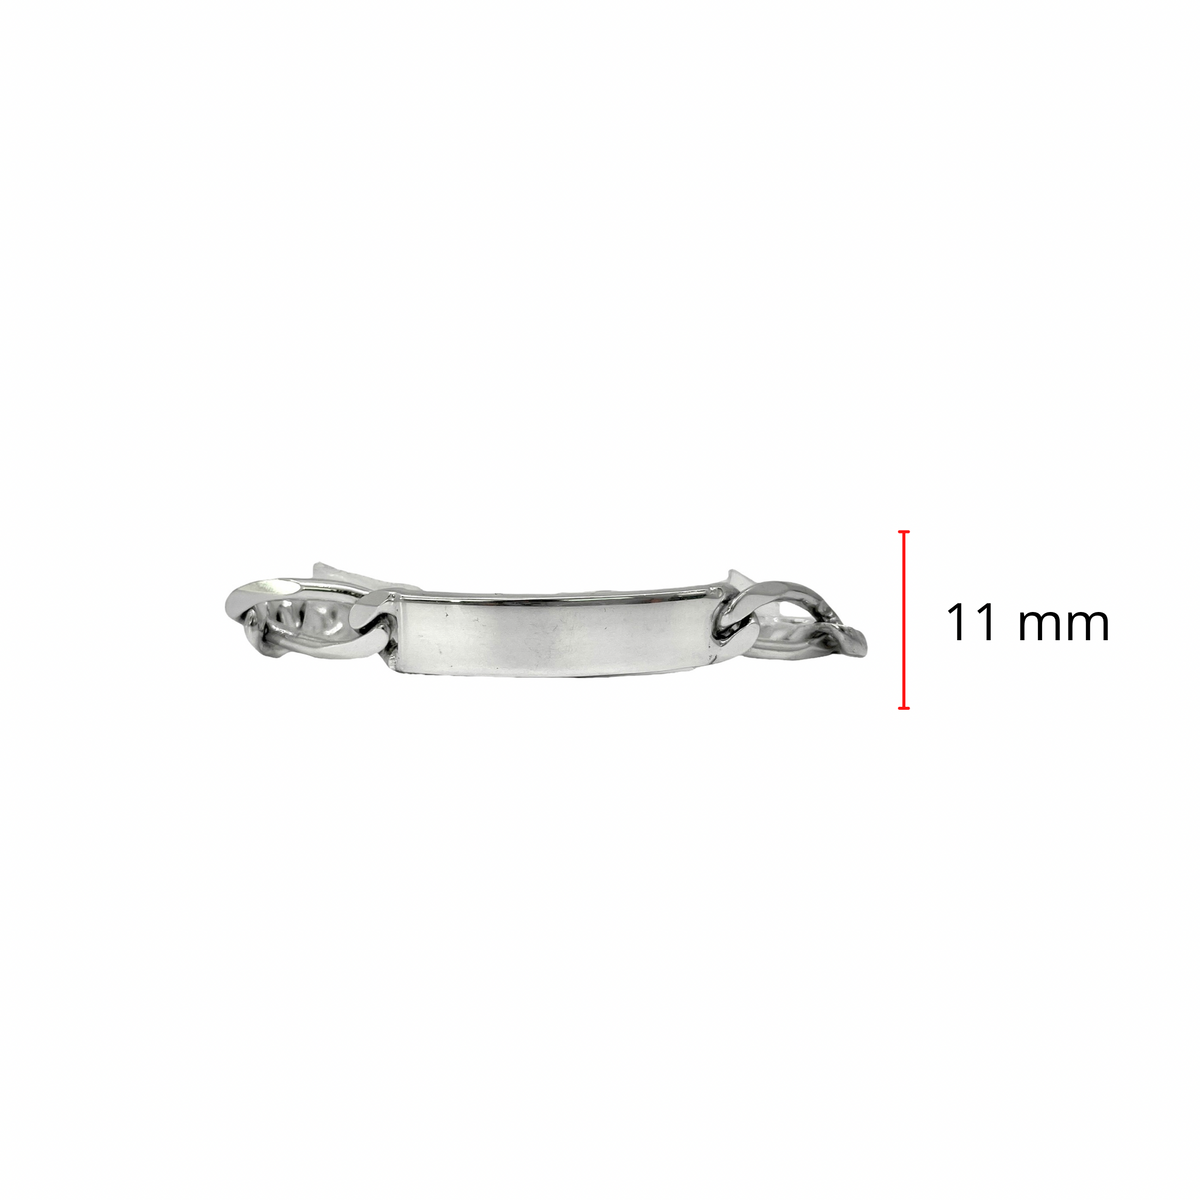 925 Sterling Silver 10.9mm Figaro I.D. Rhodium Plated Bracelet with Lobster Clasp - 9 Inches